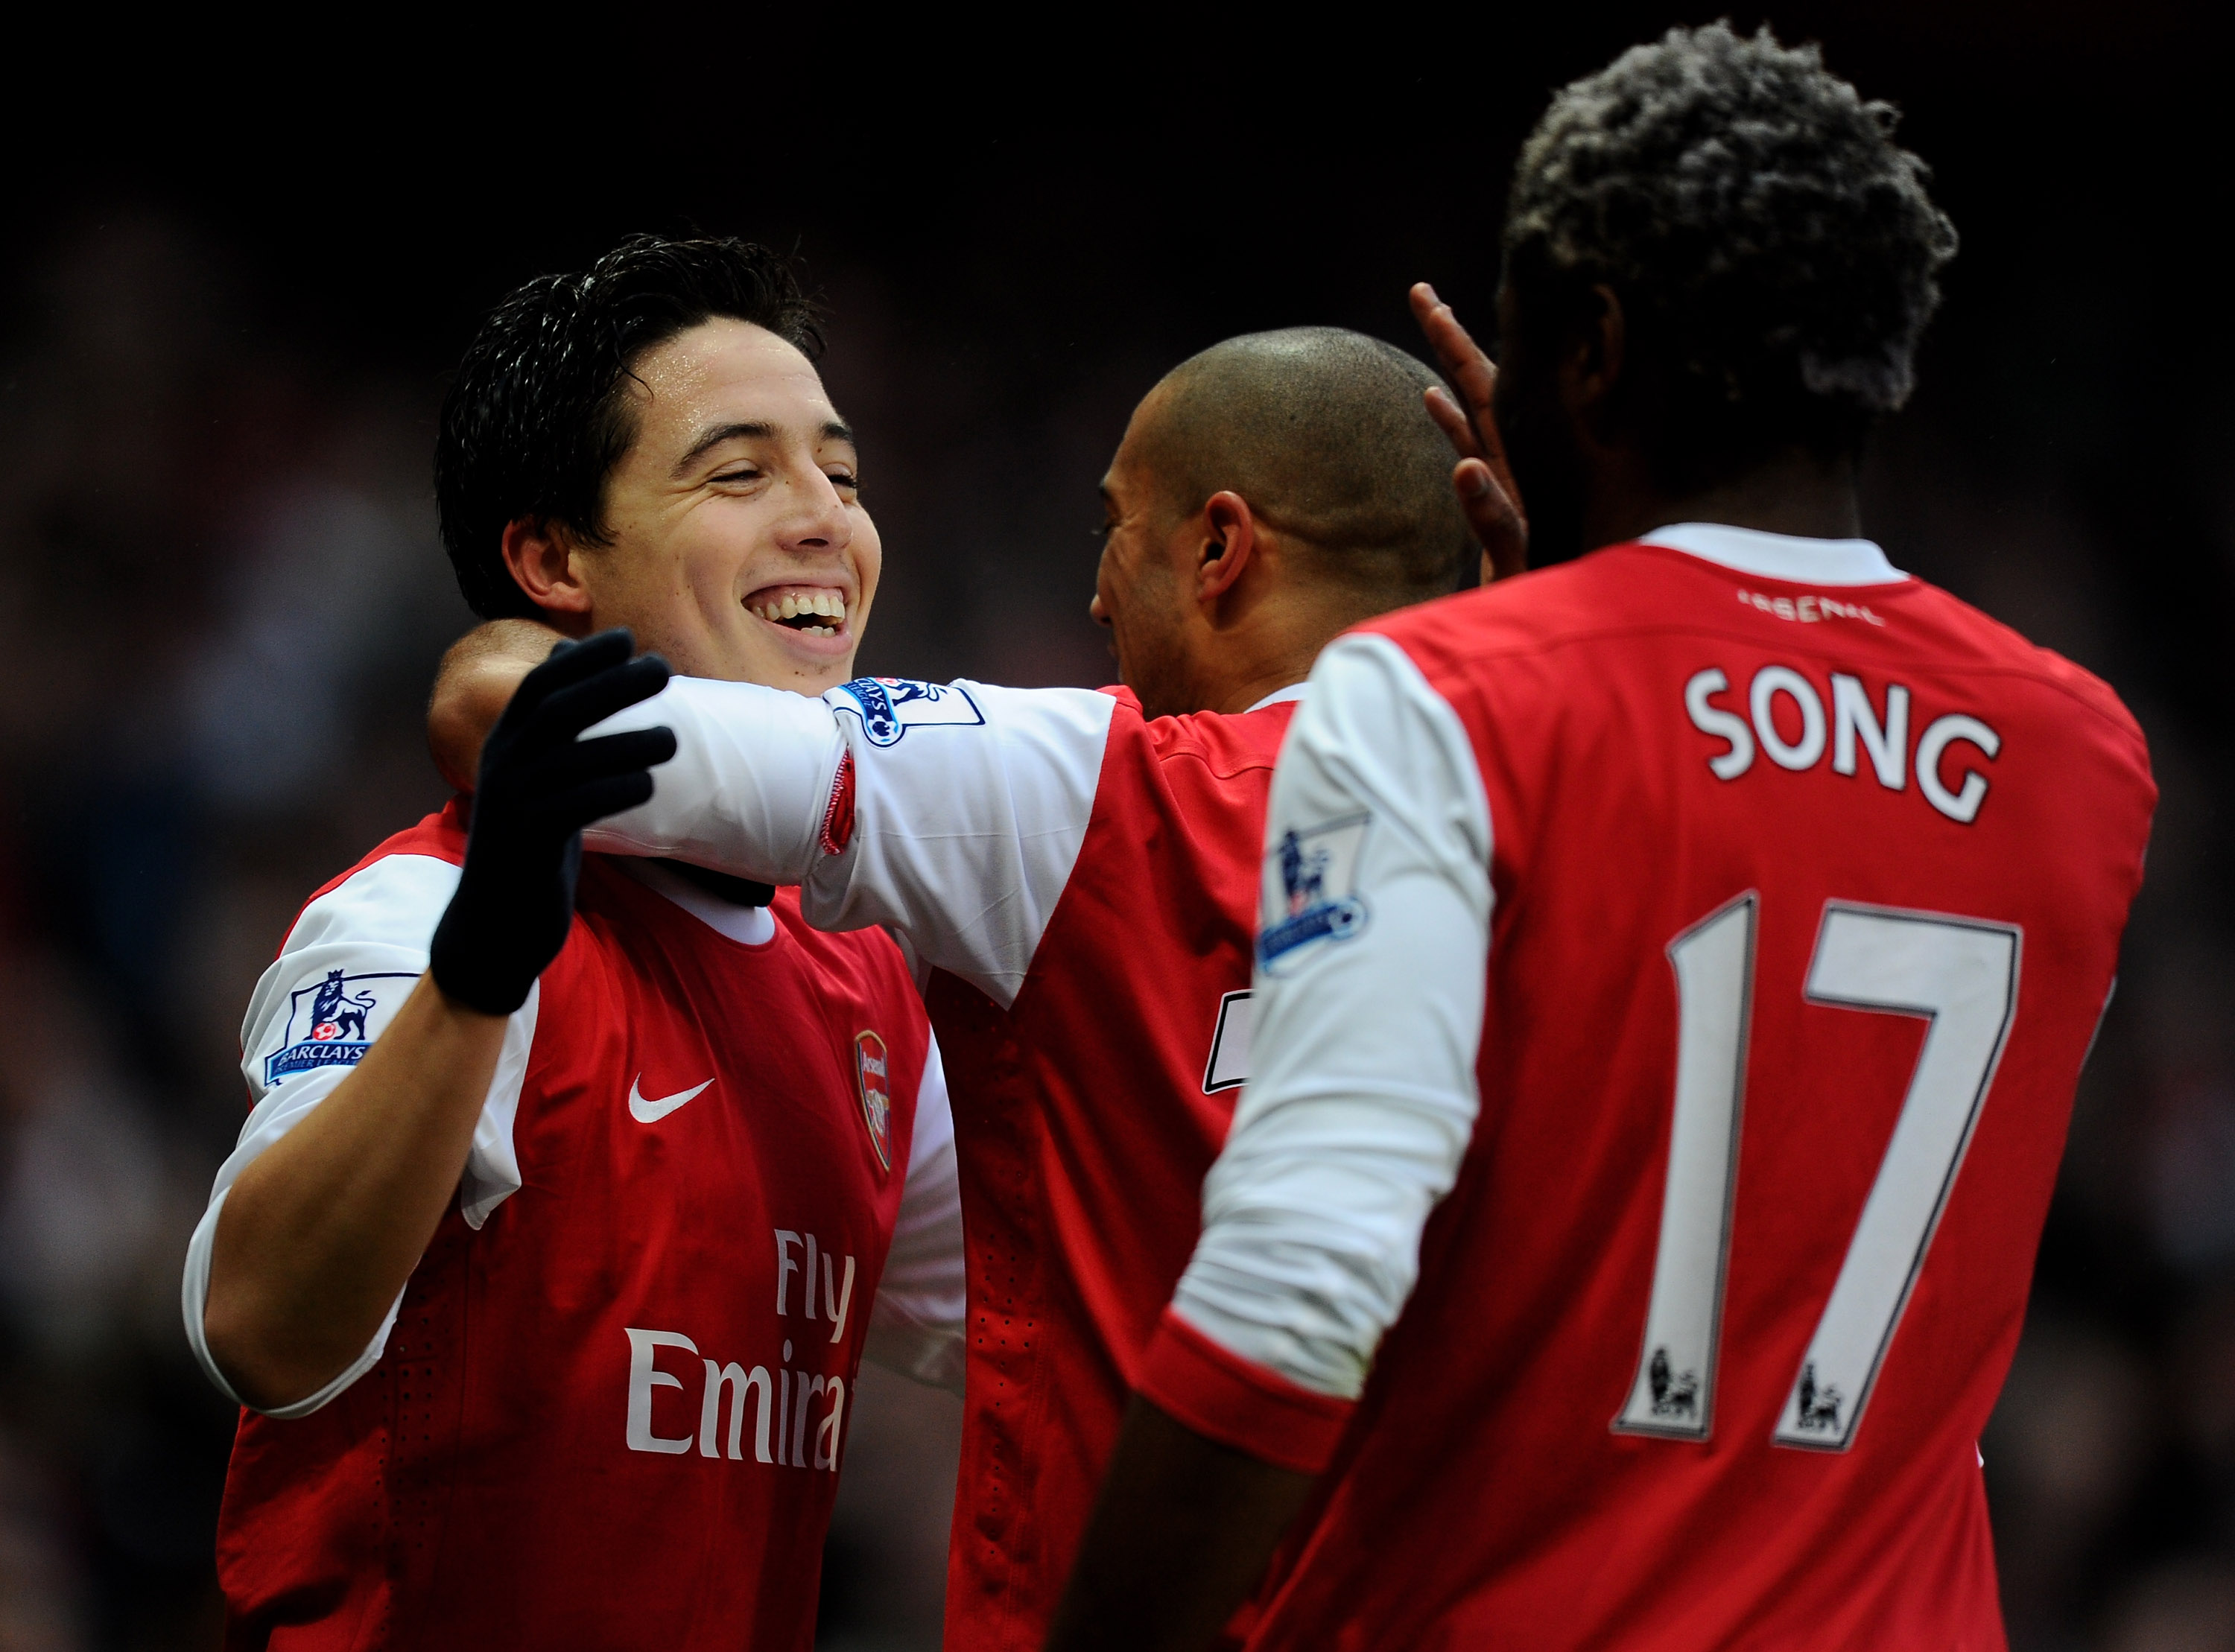 LONDON, ENGLAND - DECEMBER 04:  Samir Nasri (L) of Arsenal is congratulated by teammates after scoring the opening goal during the Barclays Premier League match between Arsenal and Fulham at the Emirates Stadium on December 4, 2010 in London, England.  (P